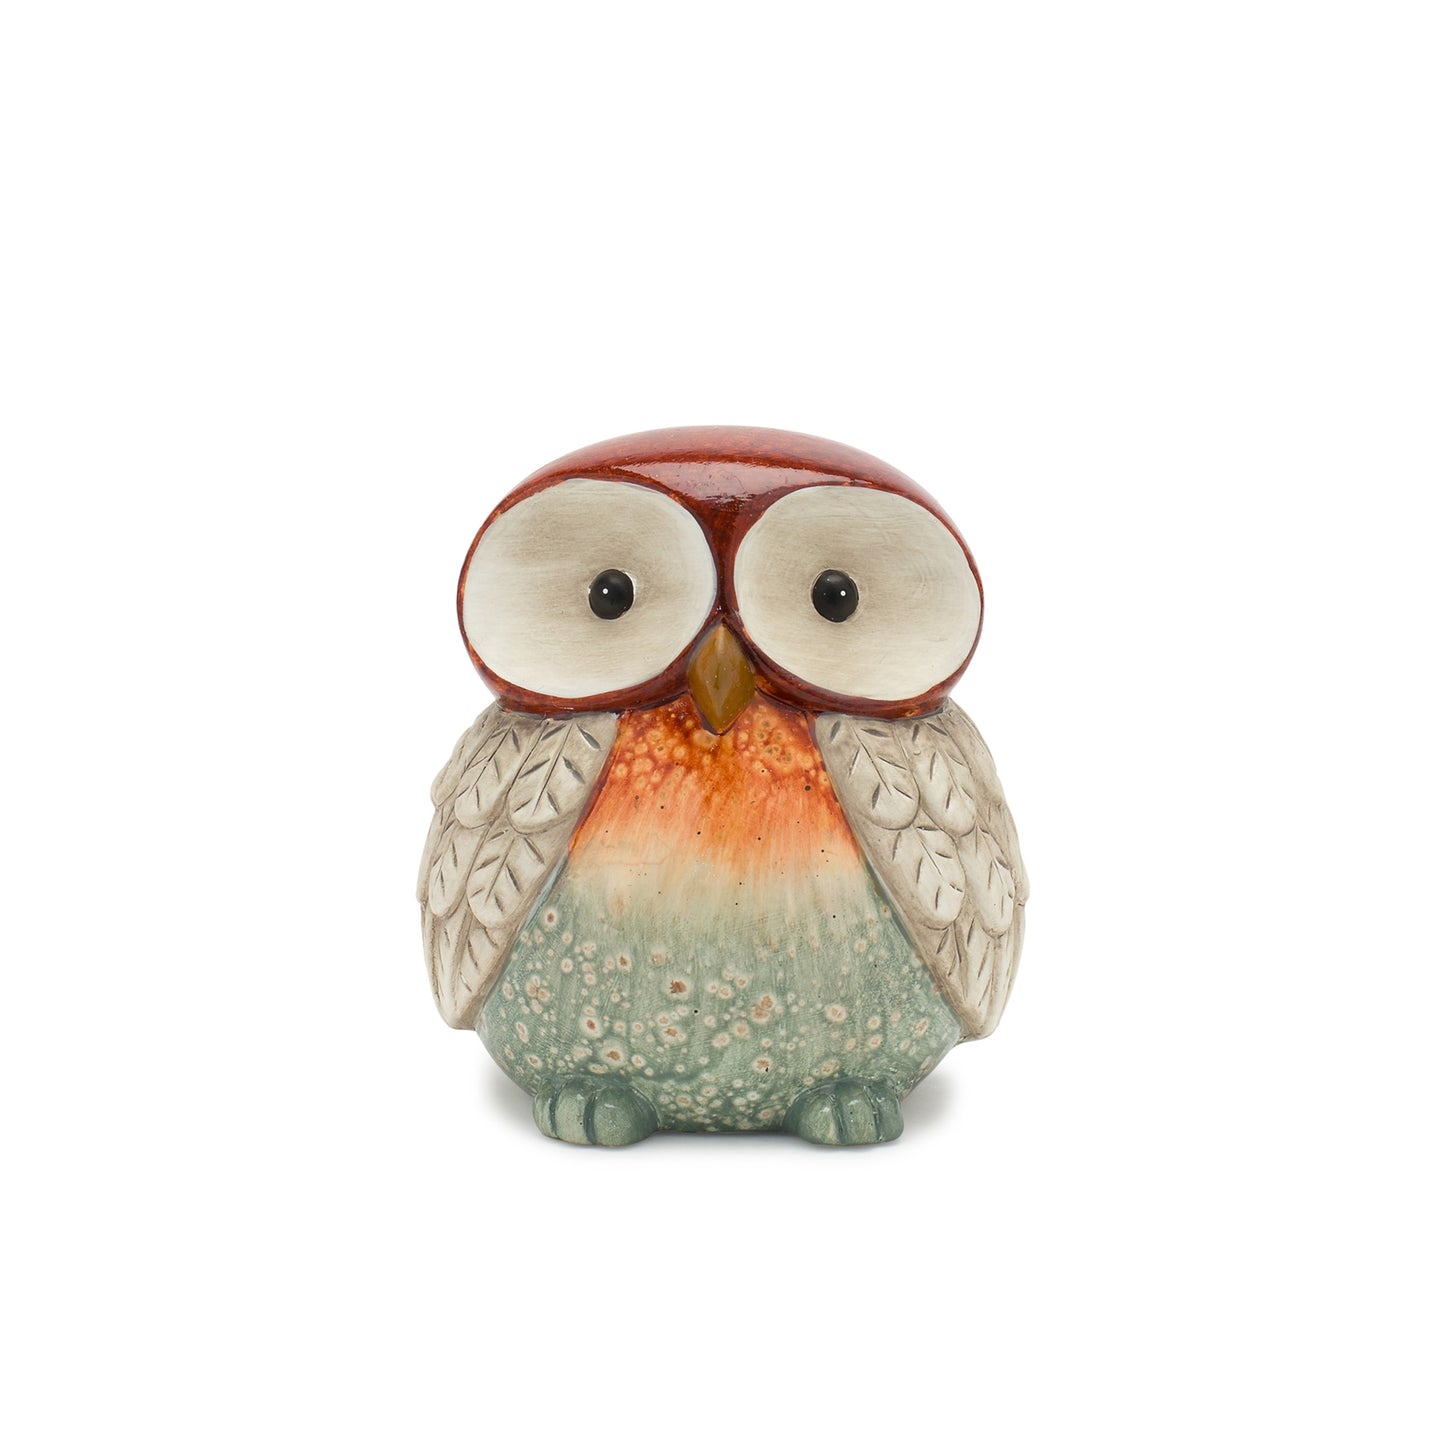 Fall Terra Cotta Owl Figurine with Glazed Accents